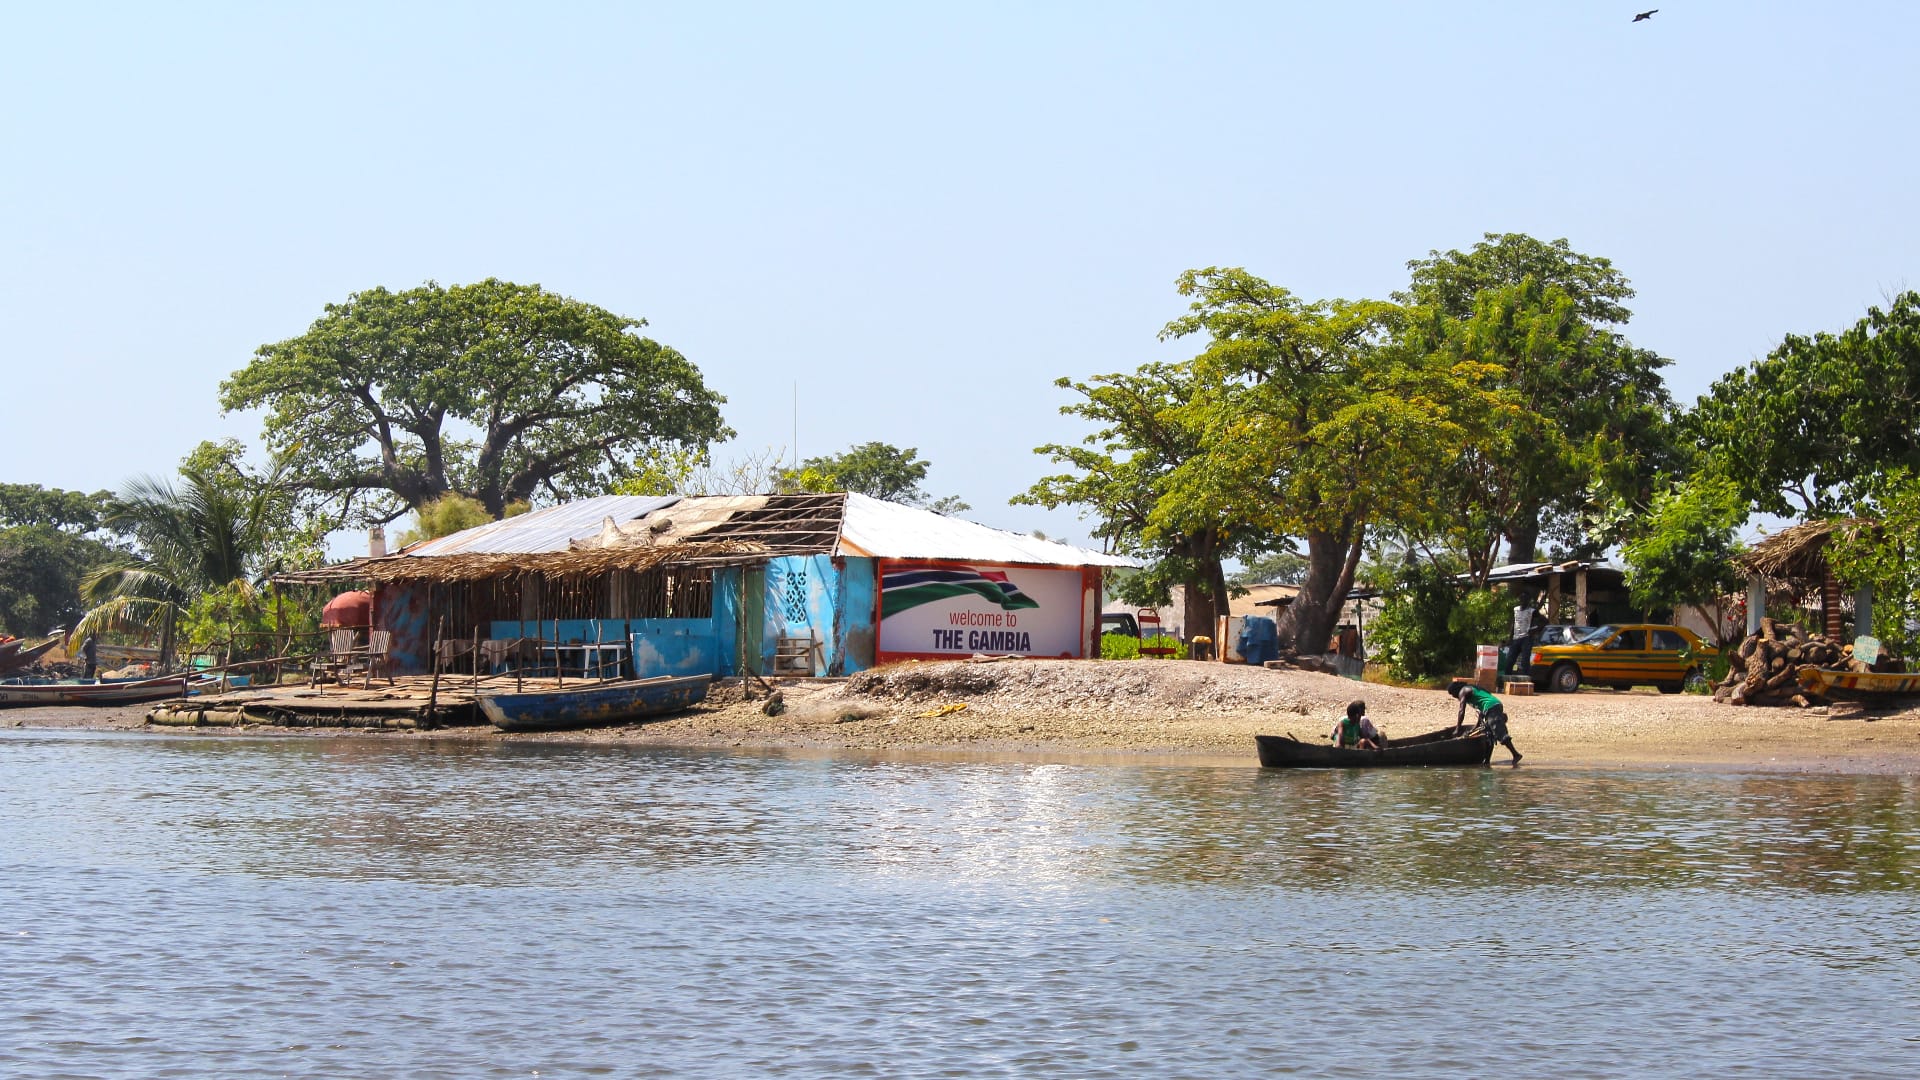 The Gambia (5)